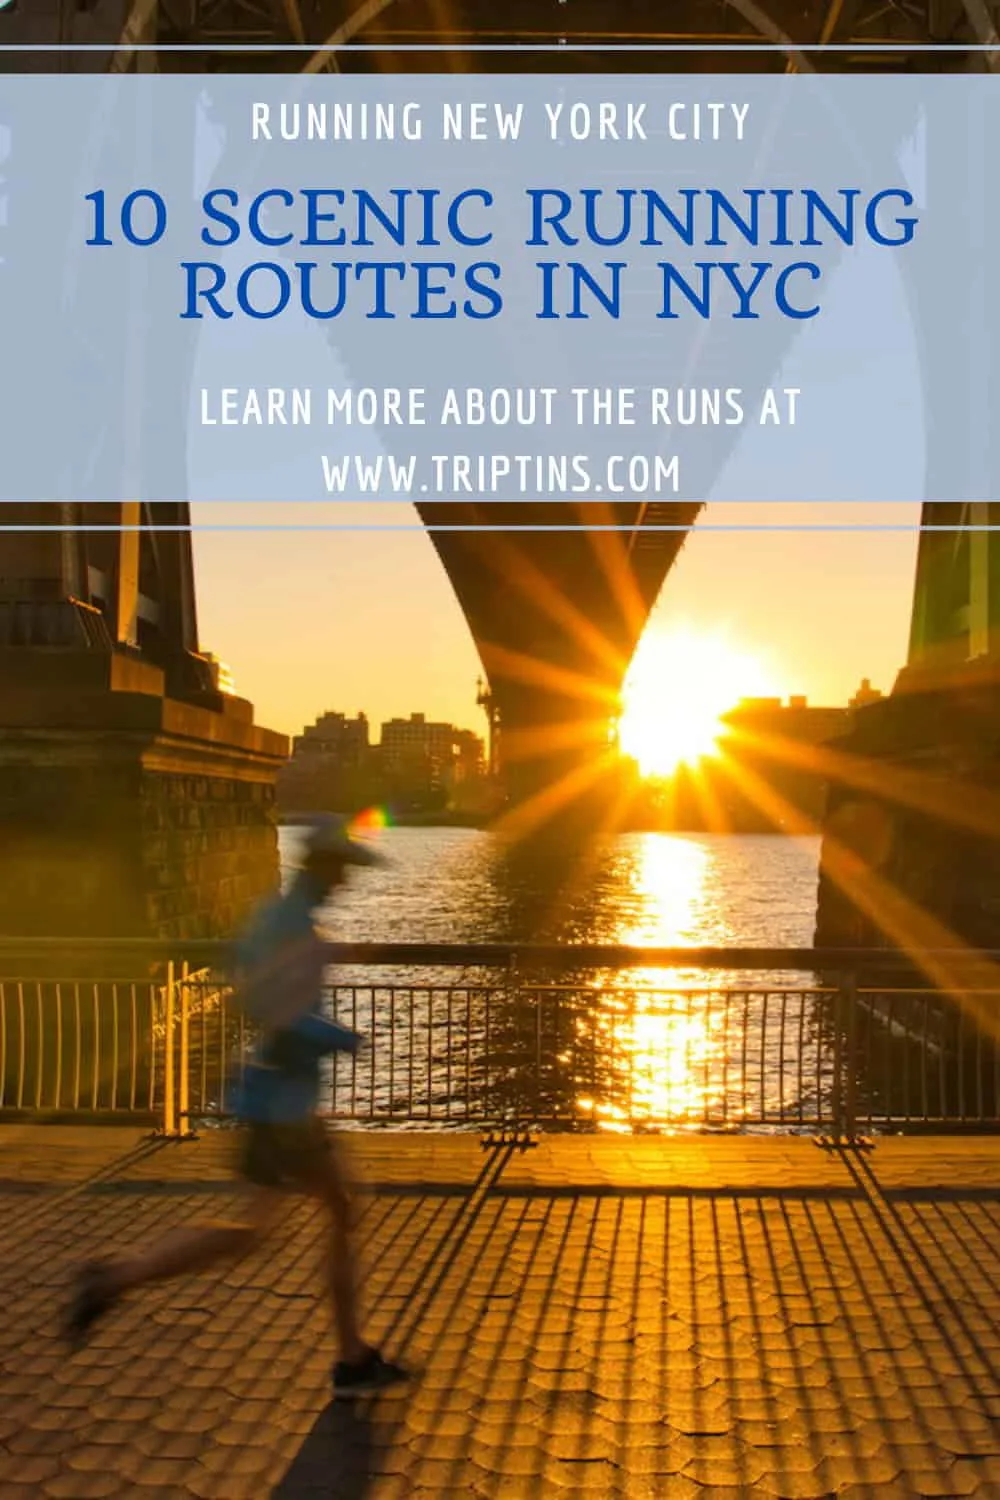 Running Routes in NYC